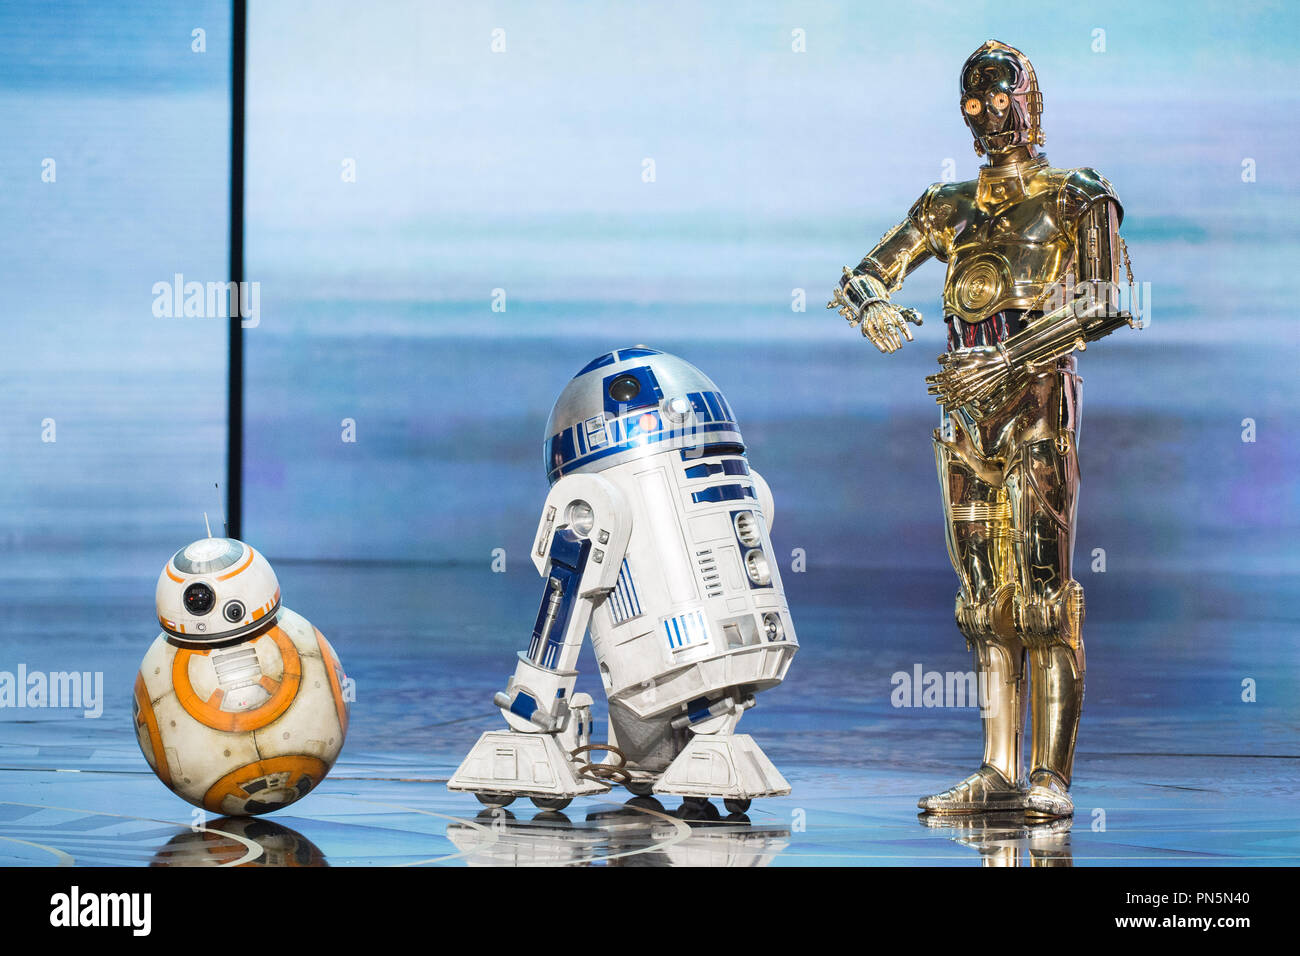 C 3po High Resolution Stock Photography and Images - Alamy